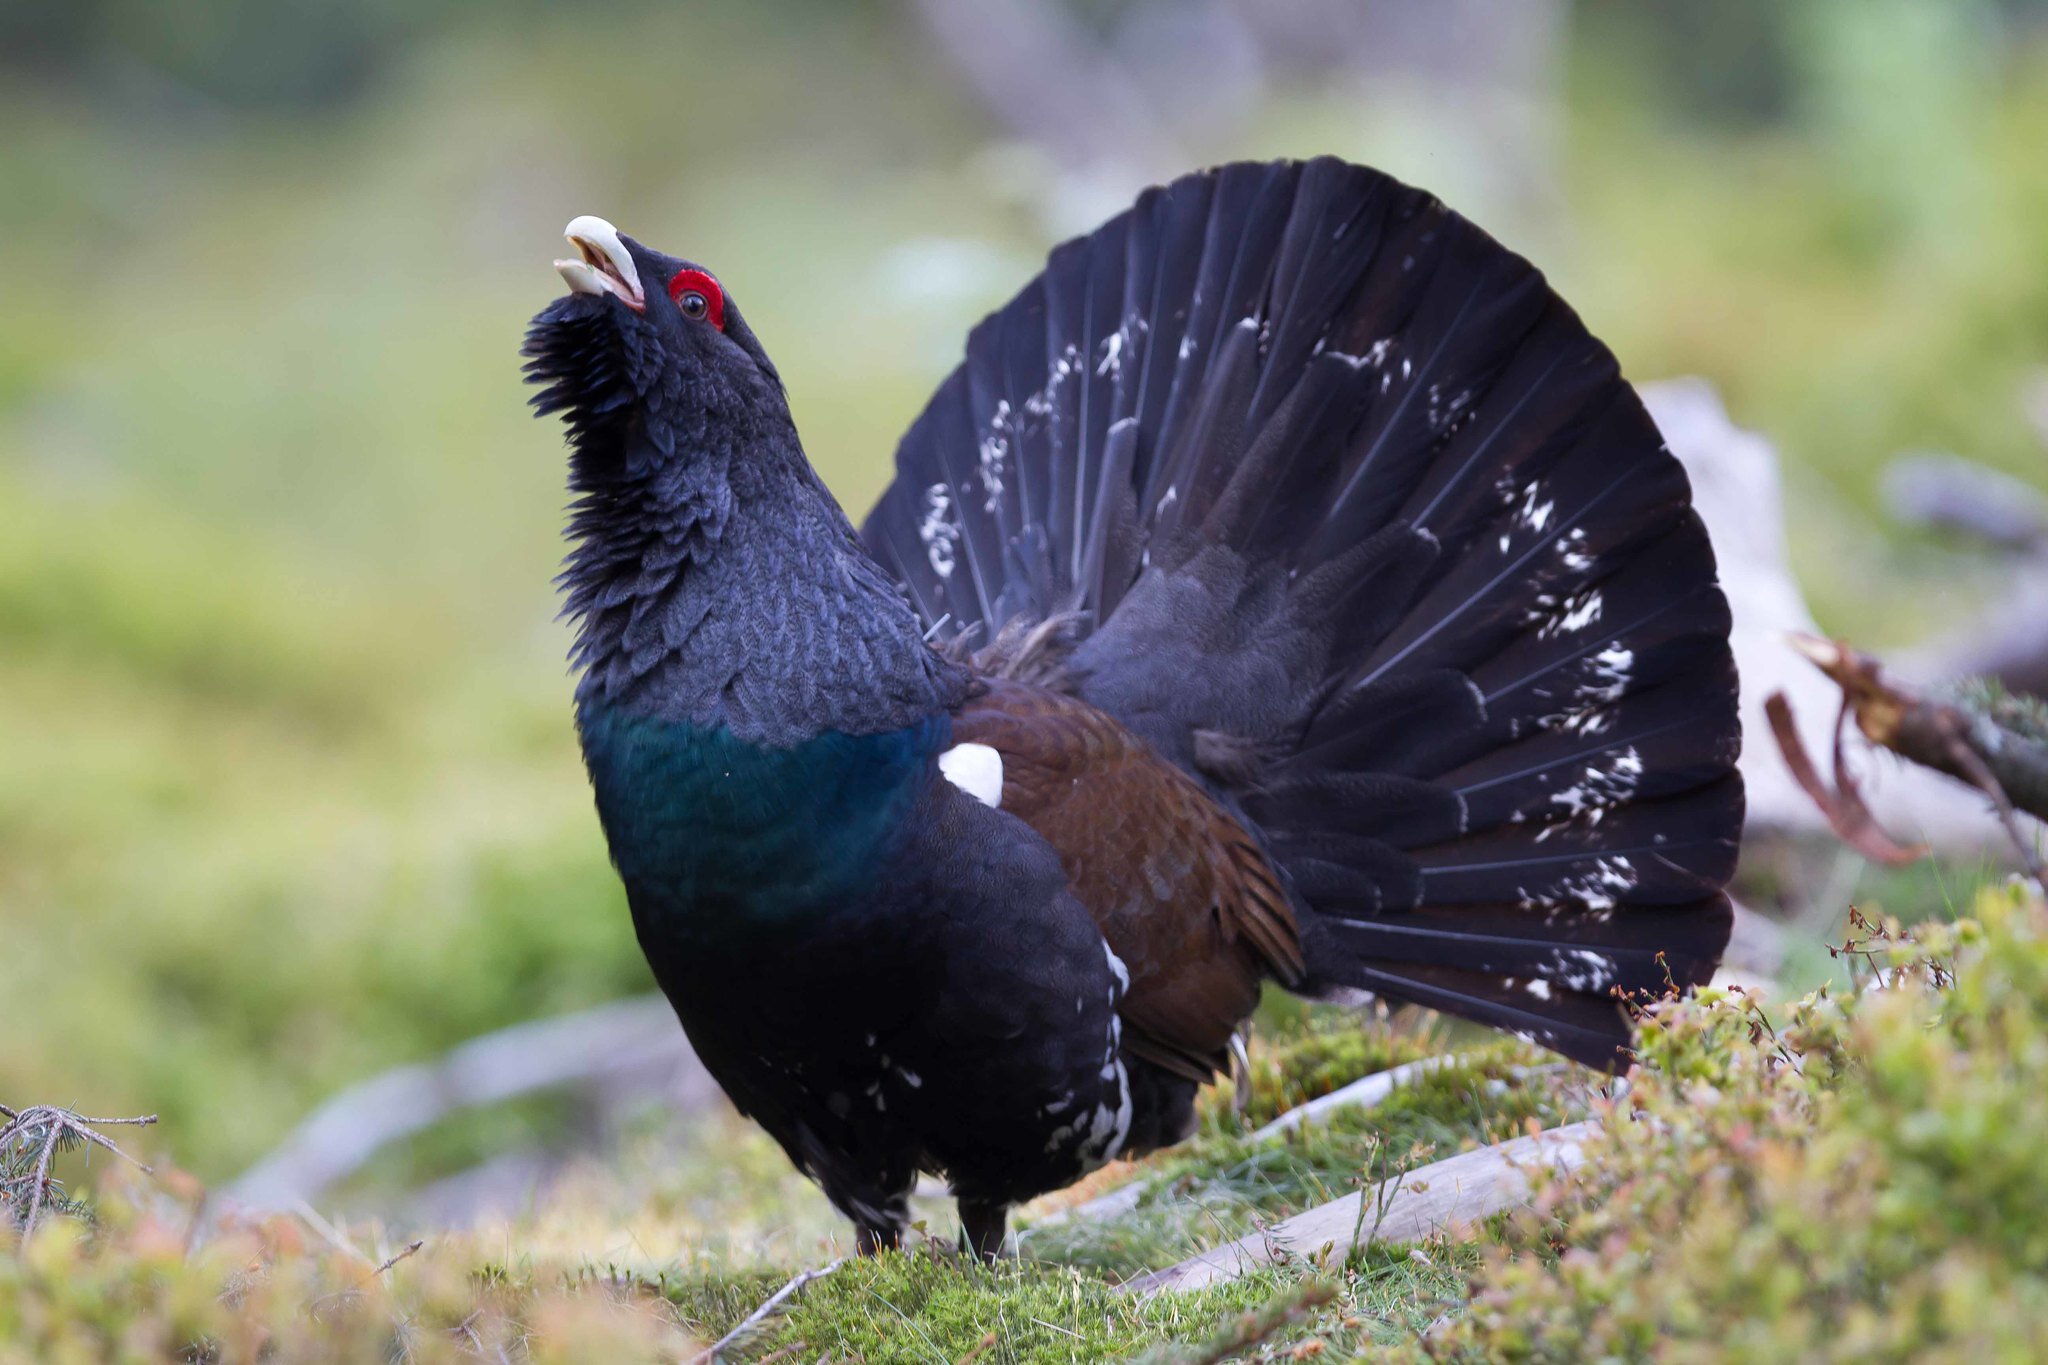 PICTURED: Capercaillie in the Black Forest, Germany. Photo credit: David Palmer. CC 2.0.